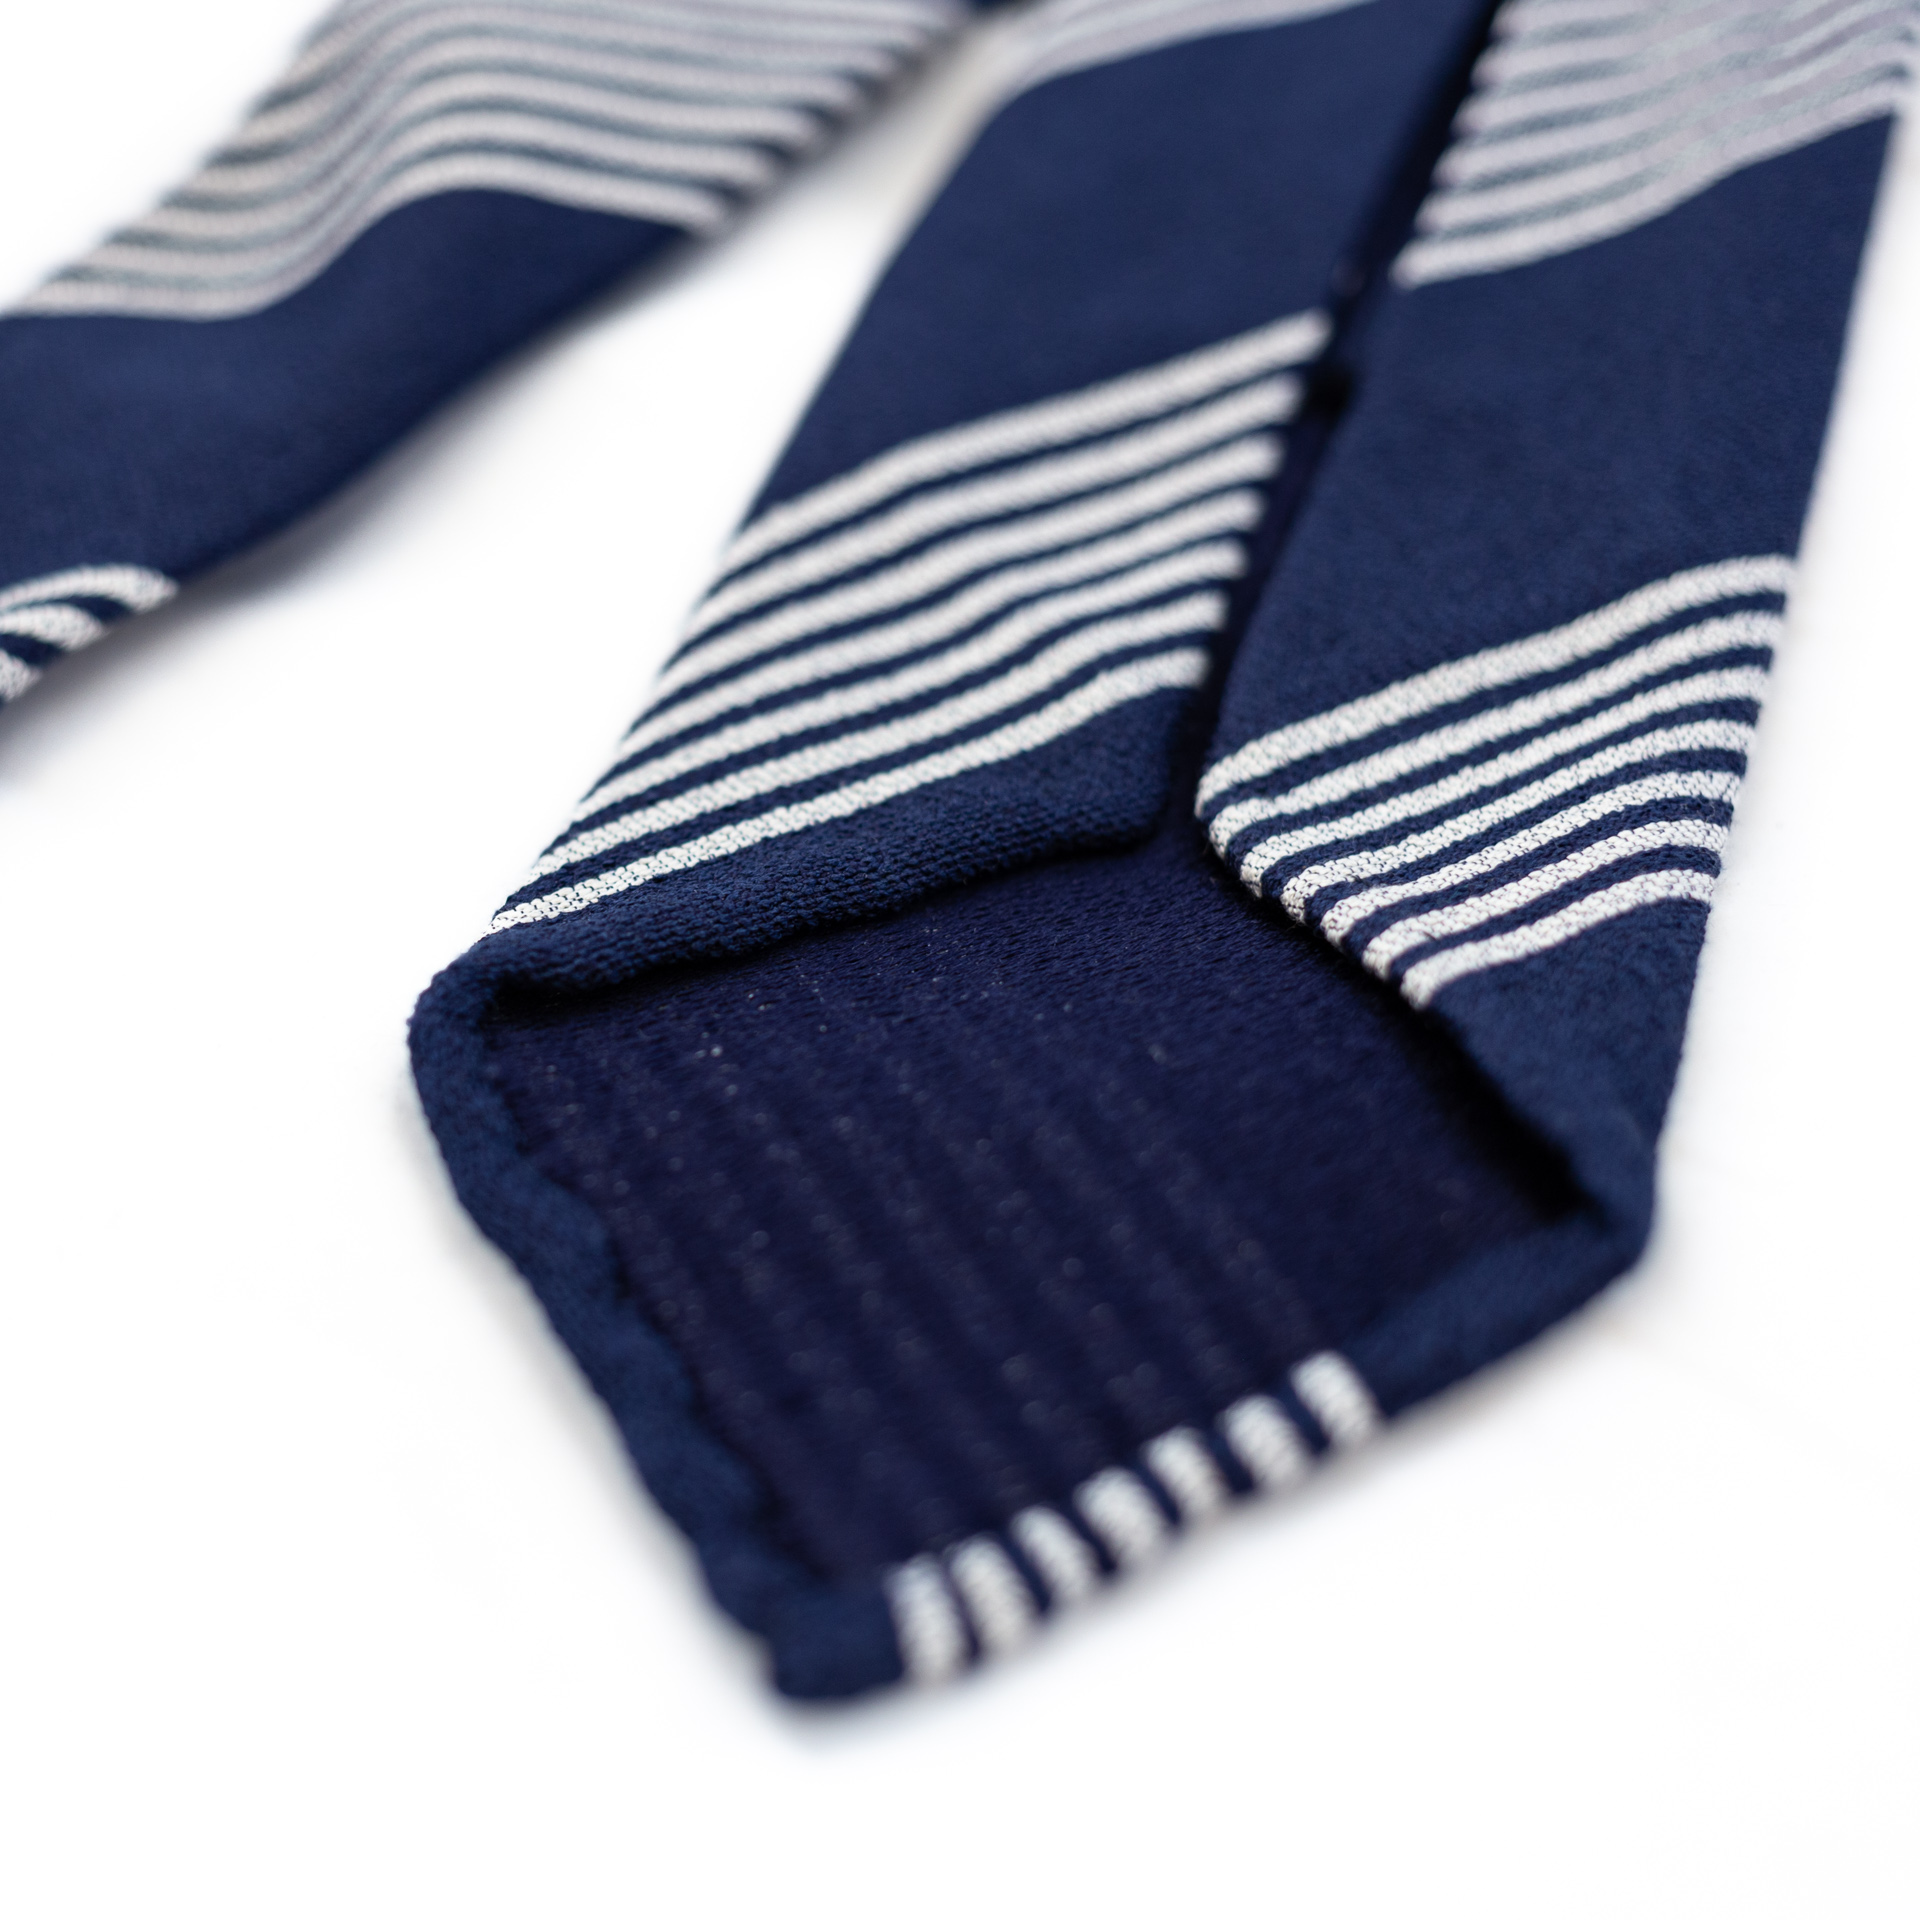 DLA 5-fold navy and white striped tie details